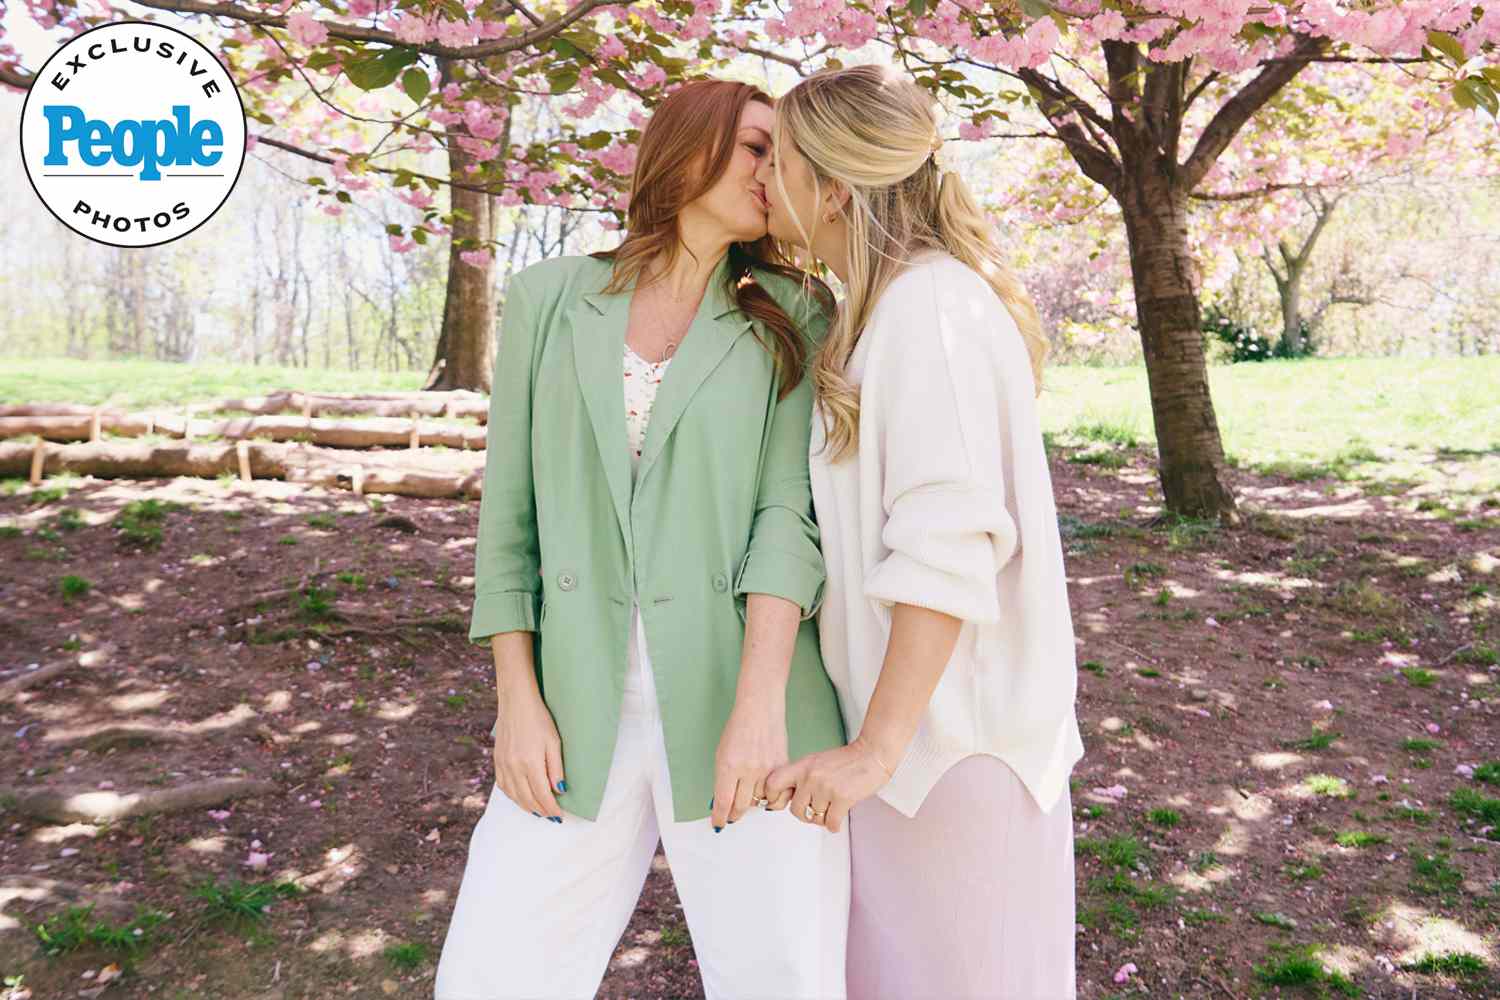 Broadways Jessica Phillips and Chelsea Nachman Are Engaged